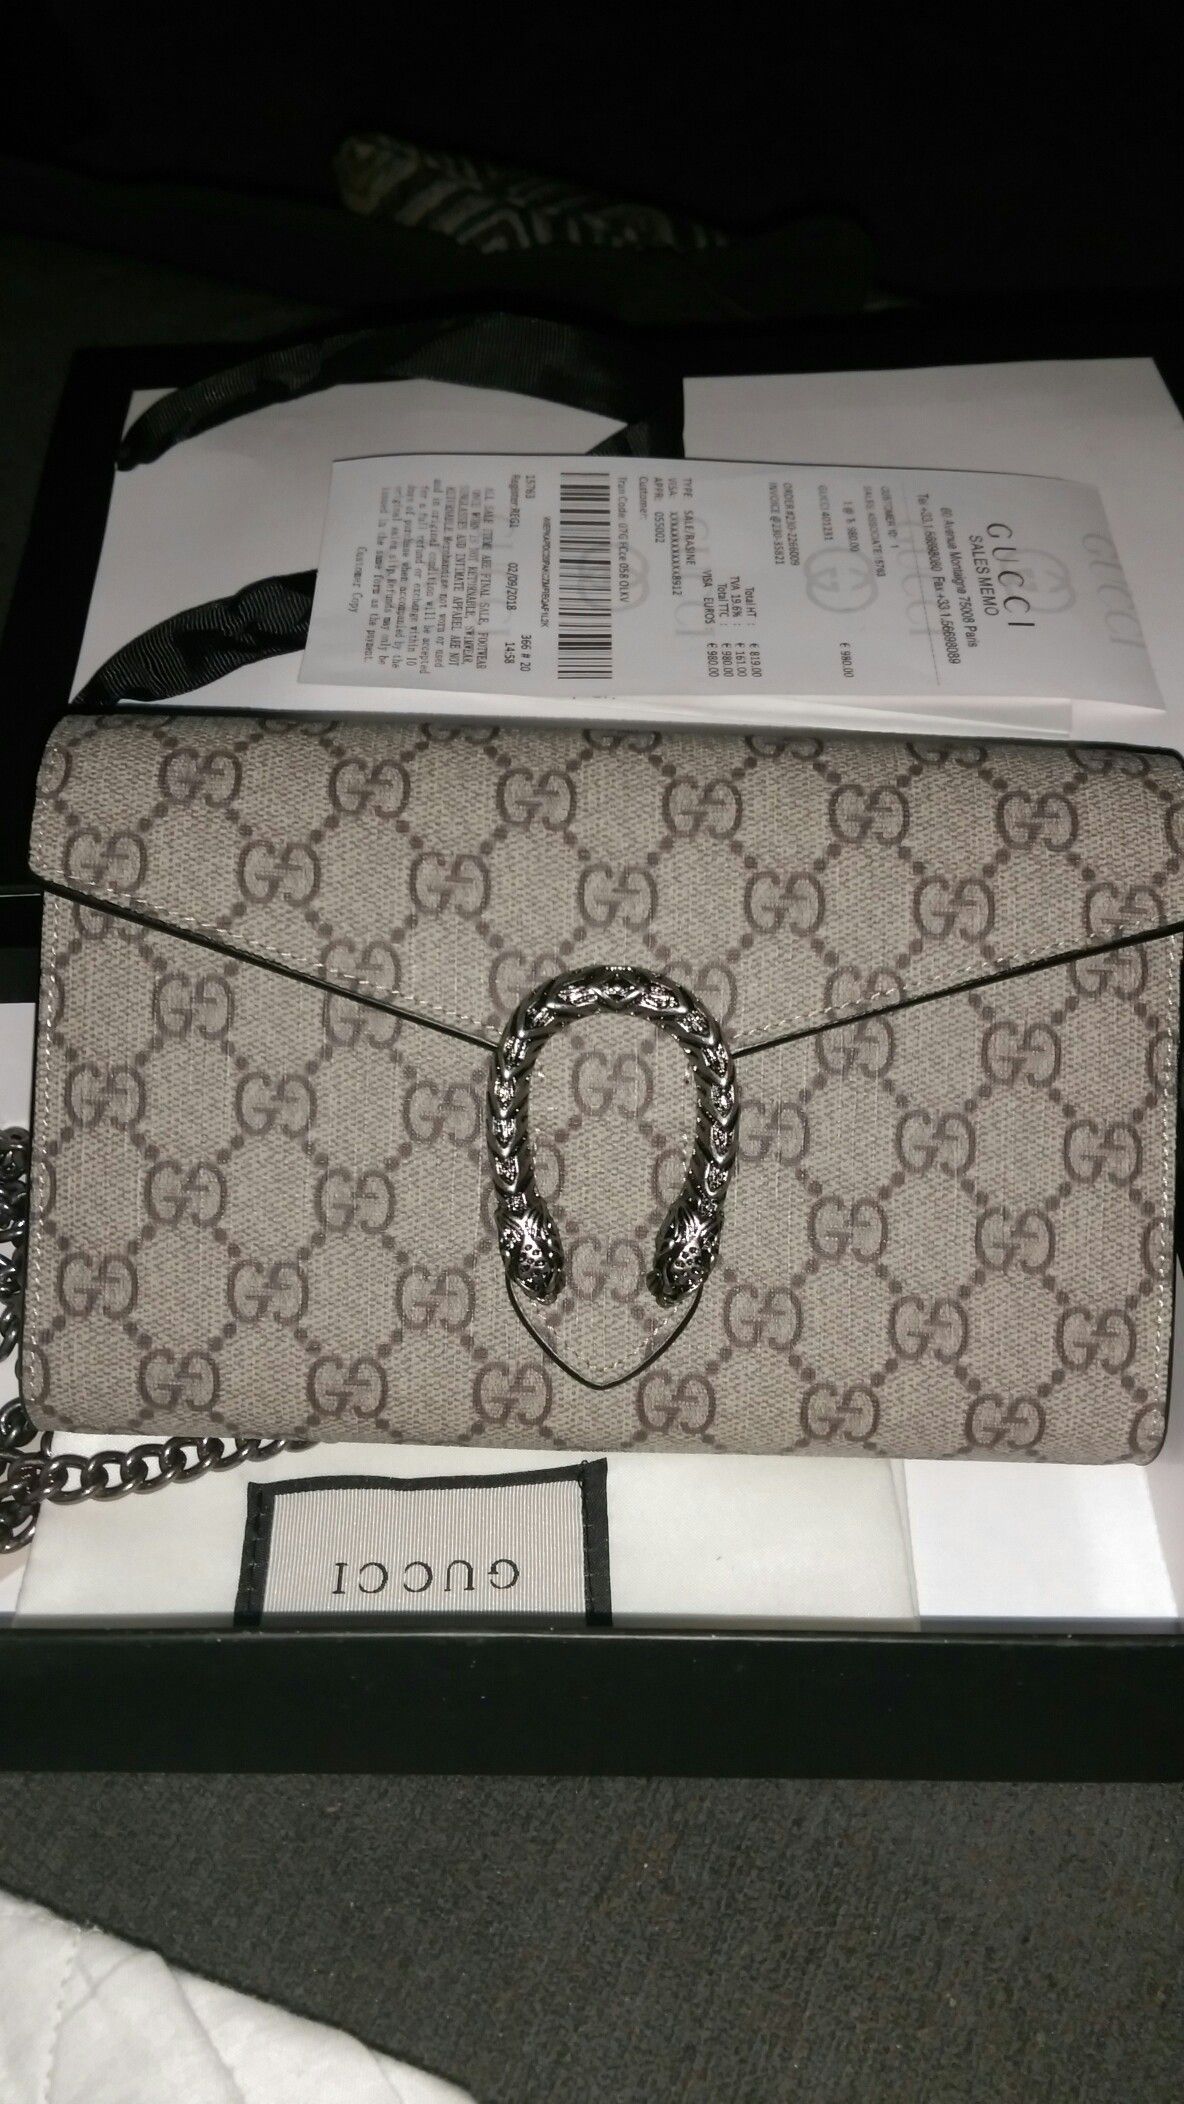 Sold Gucci WOC Dionysus used in good condition.